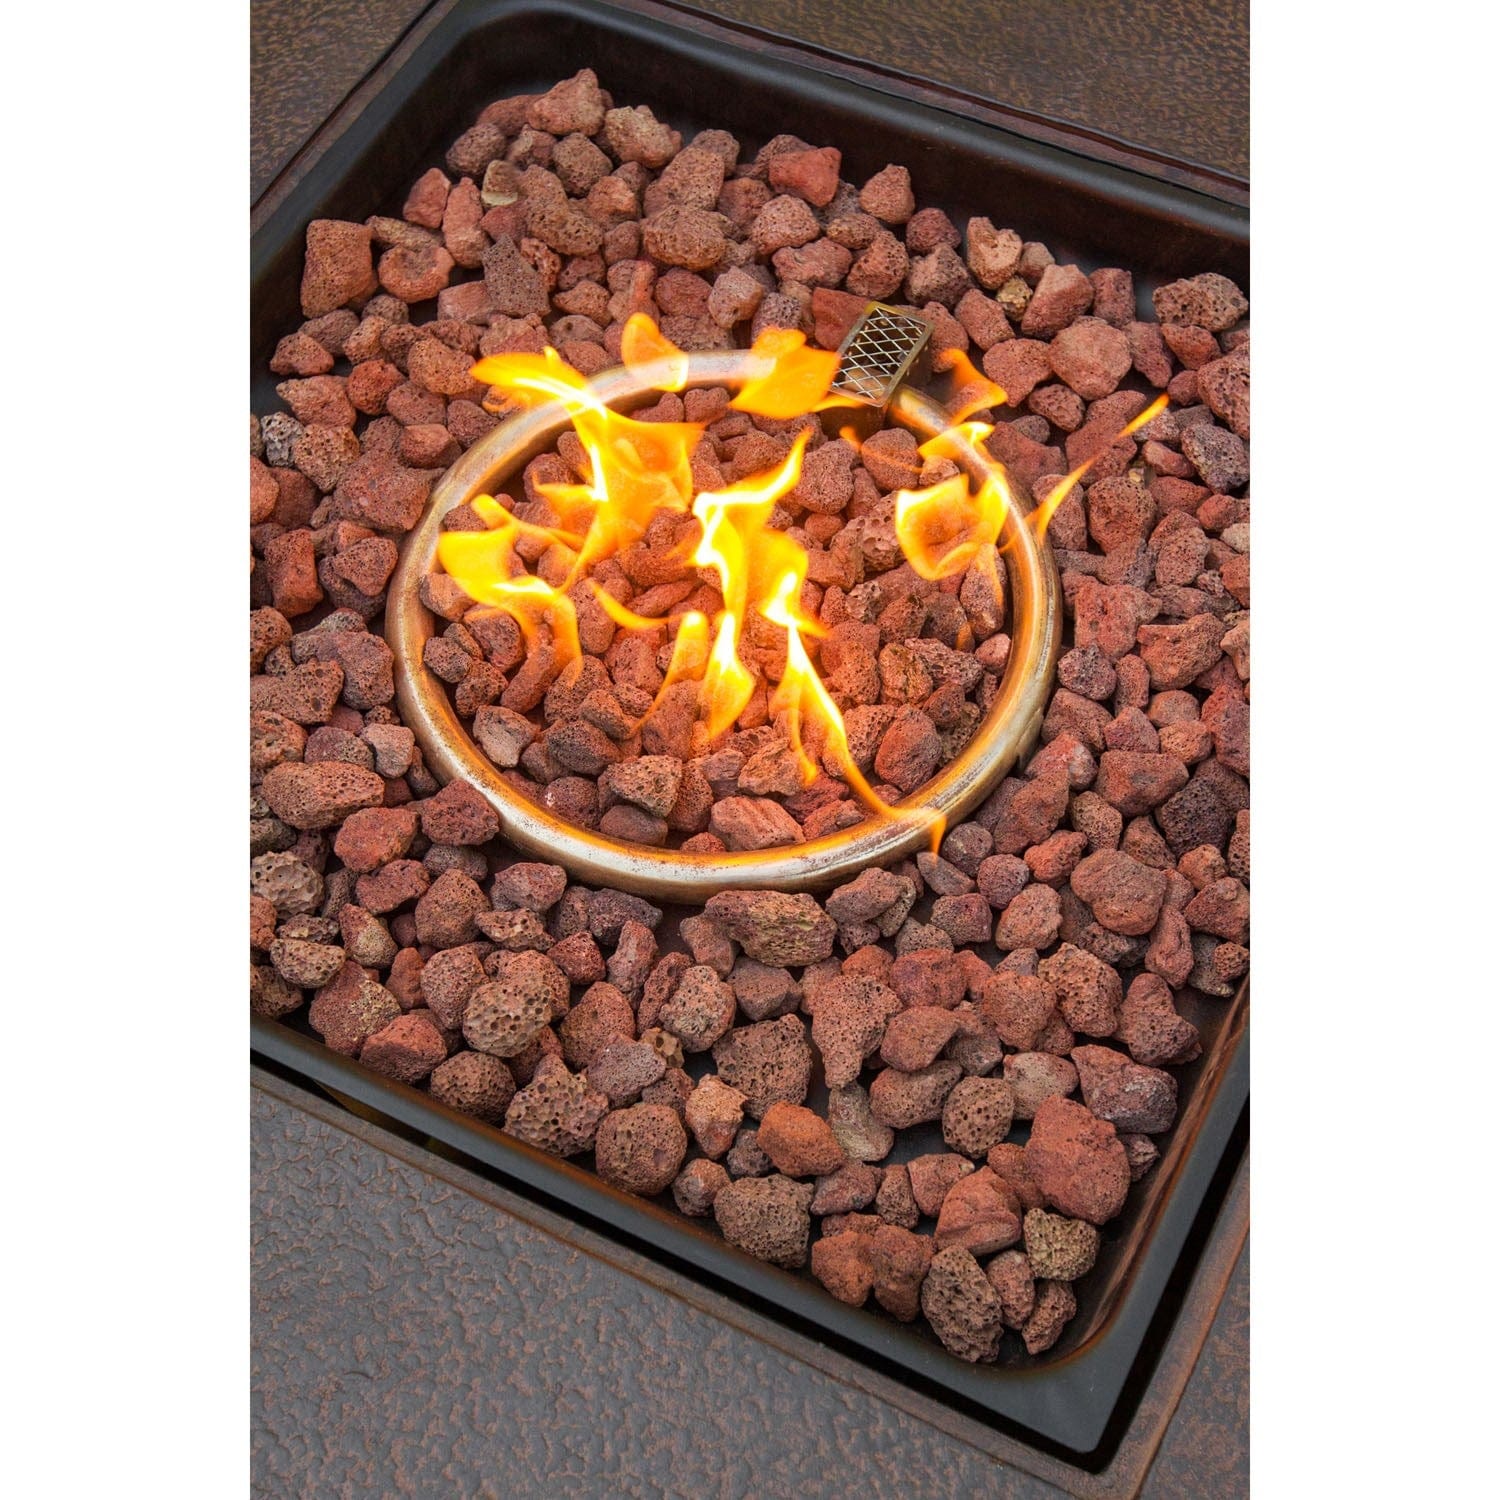 Hanover Fire Pit Chat Set Hanover - Stone Harbor 5pc Fire Pit (4 cushion rockers, 40" square fire pit)